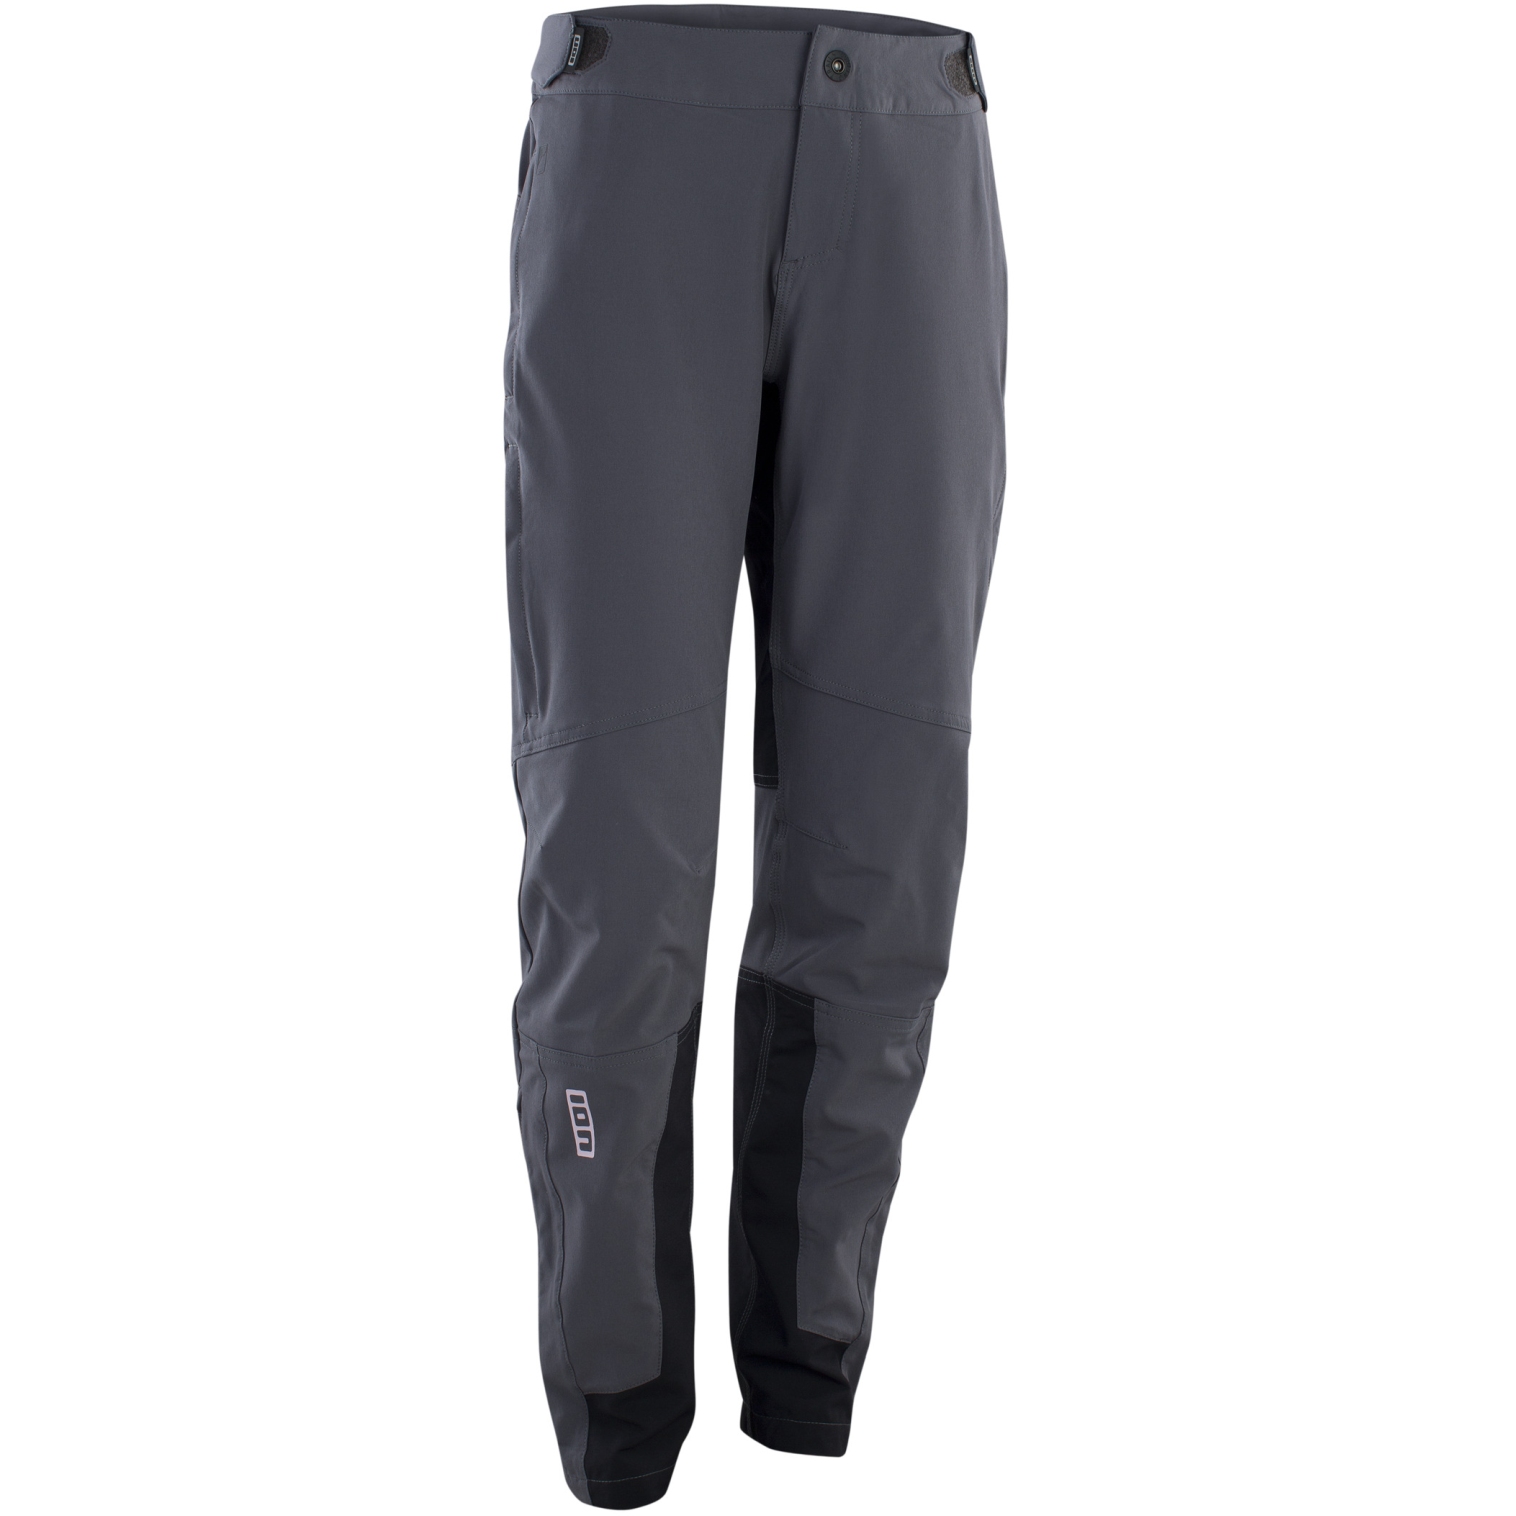 Image of ION Bike Outerwear 4W Softshell Pants Shelter Women - Grey